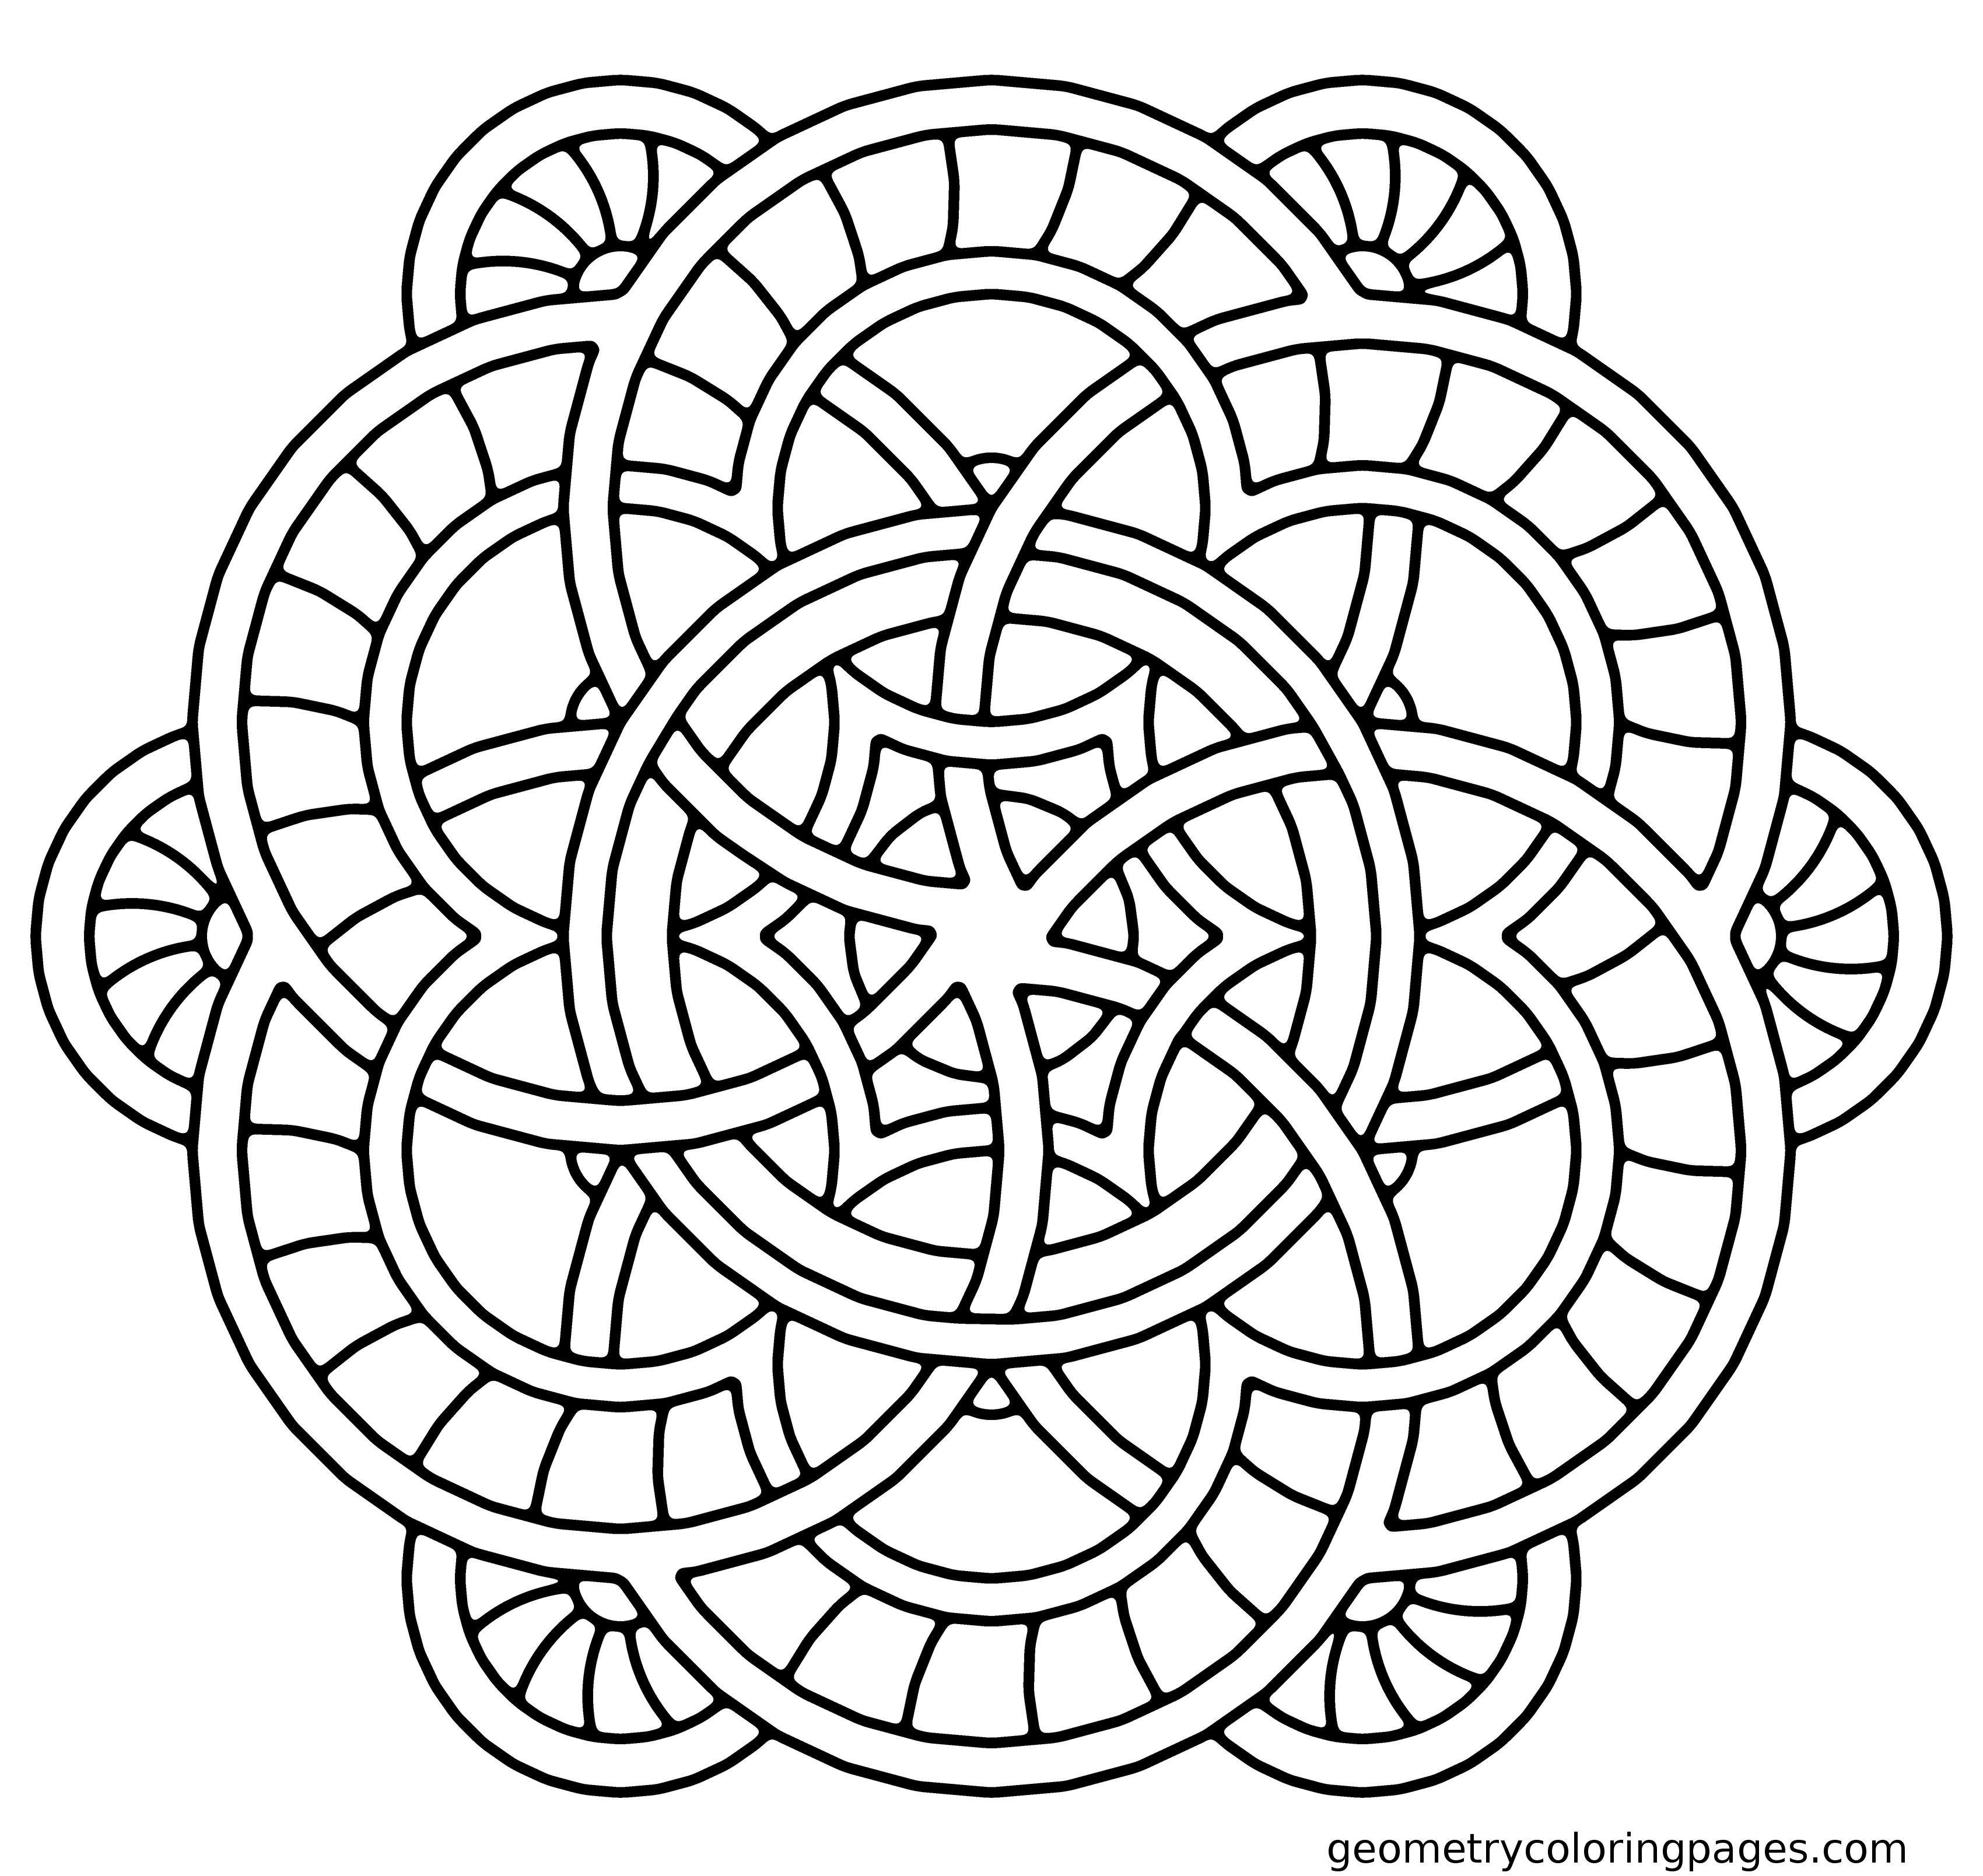 Mandala Coloring Pages For Adults Mandala Coloring Pages Printable Free Cozy For Kids Fresh With